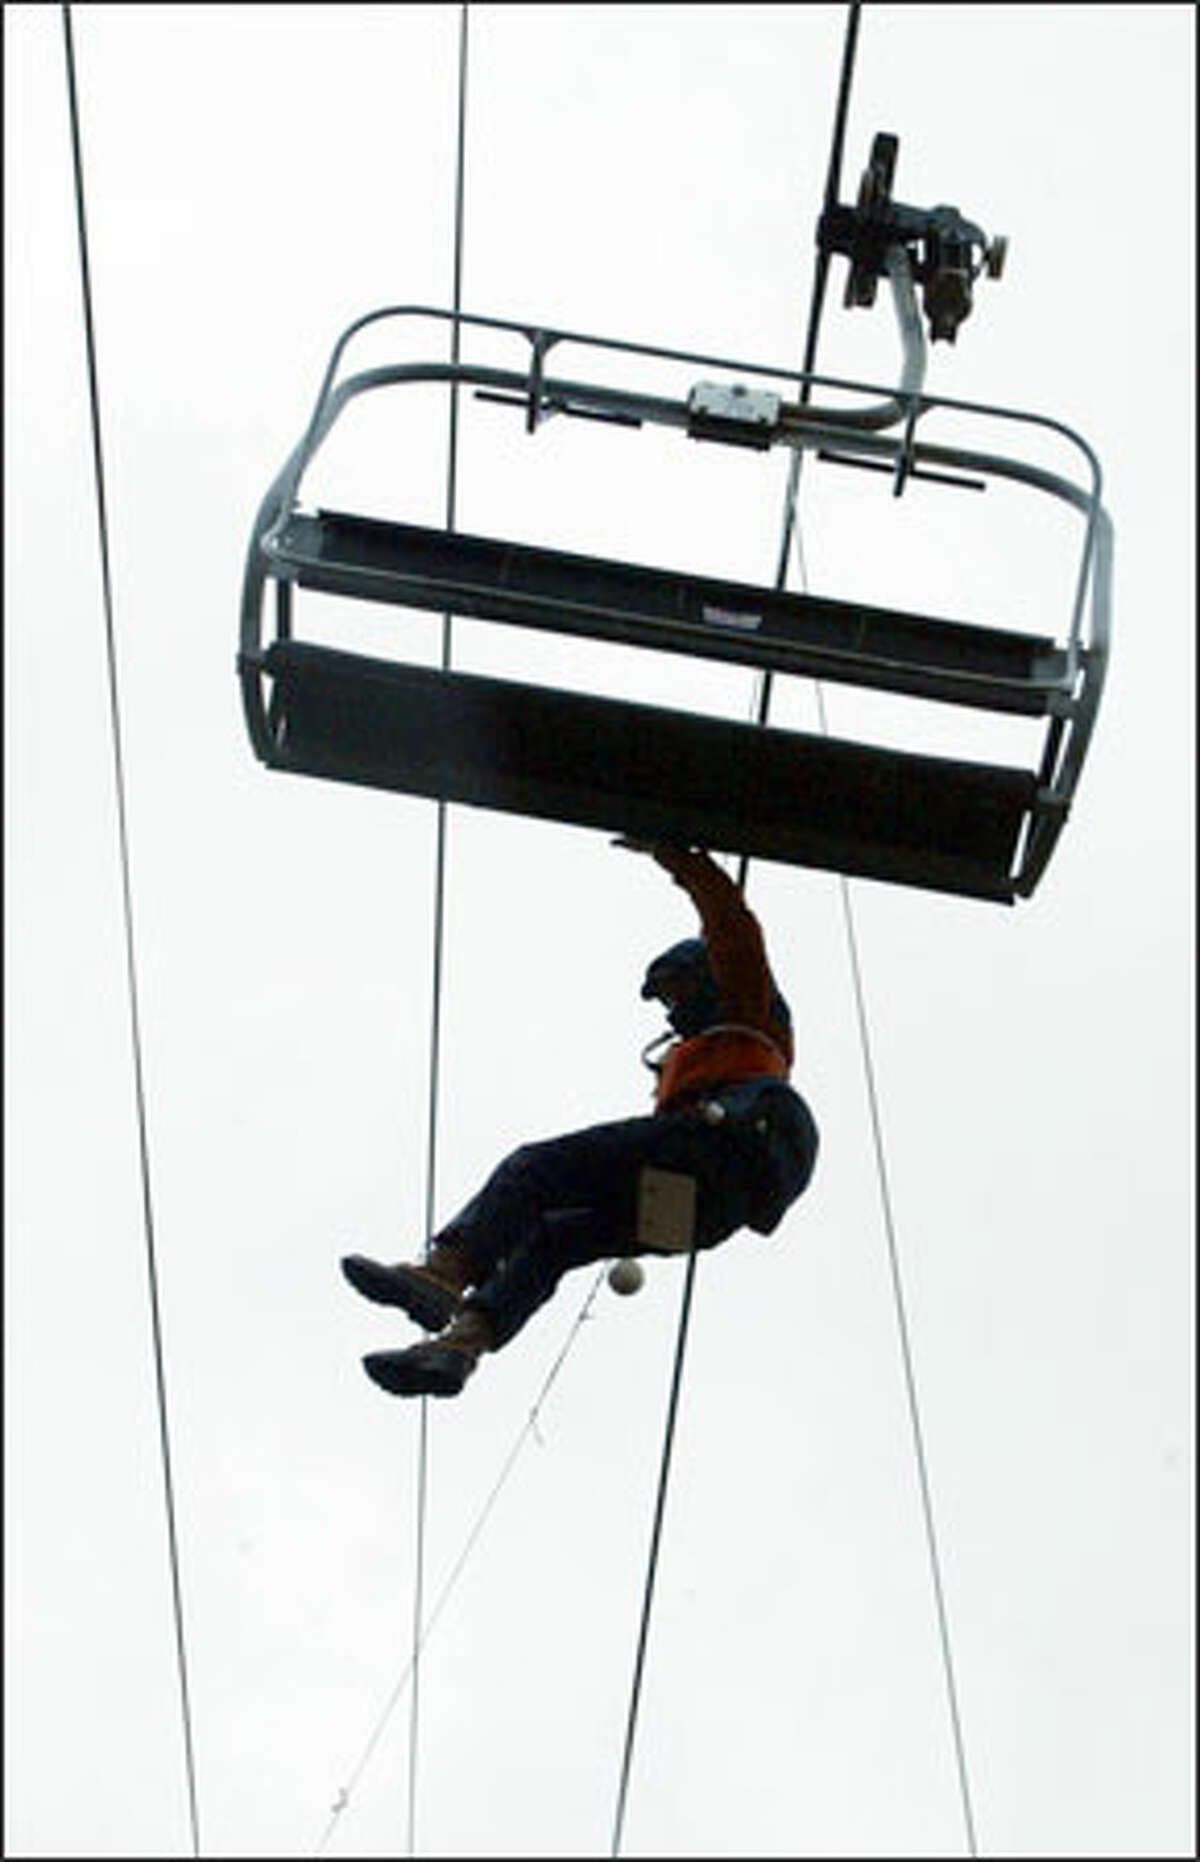 Dave Buck is lowered off the chairlift at Summit Central at Snoqualmie Pass during training exercises for volunteers. The chair evacuation is one of many skills that members of the ski patrol must learn.